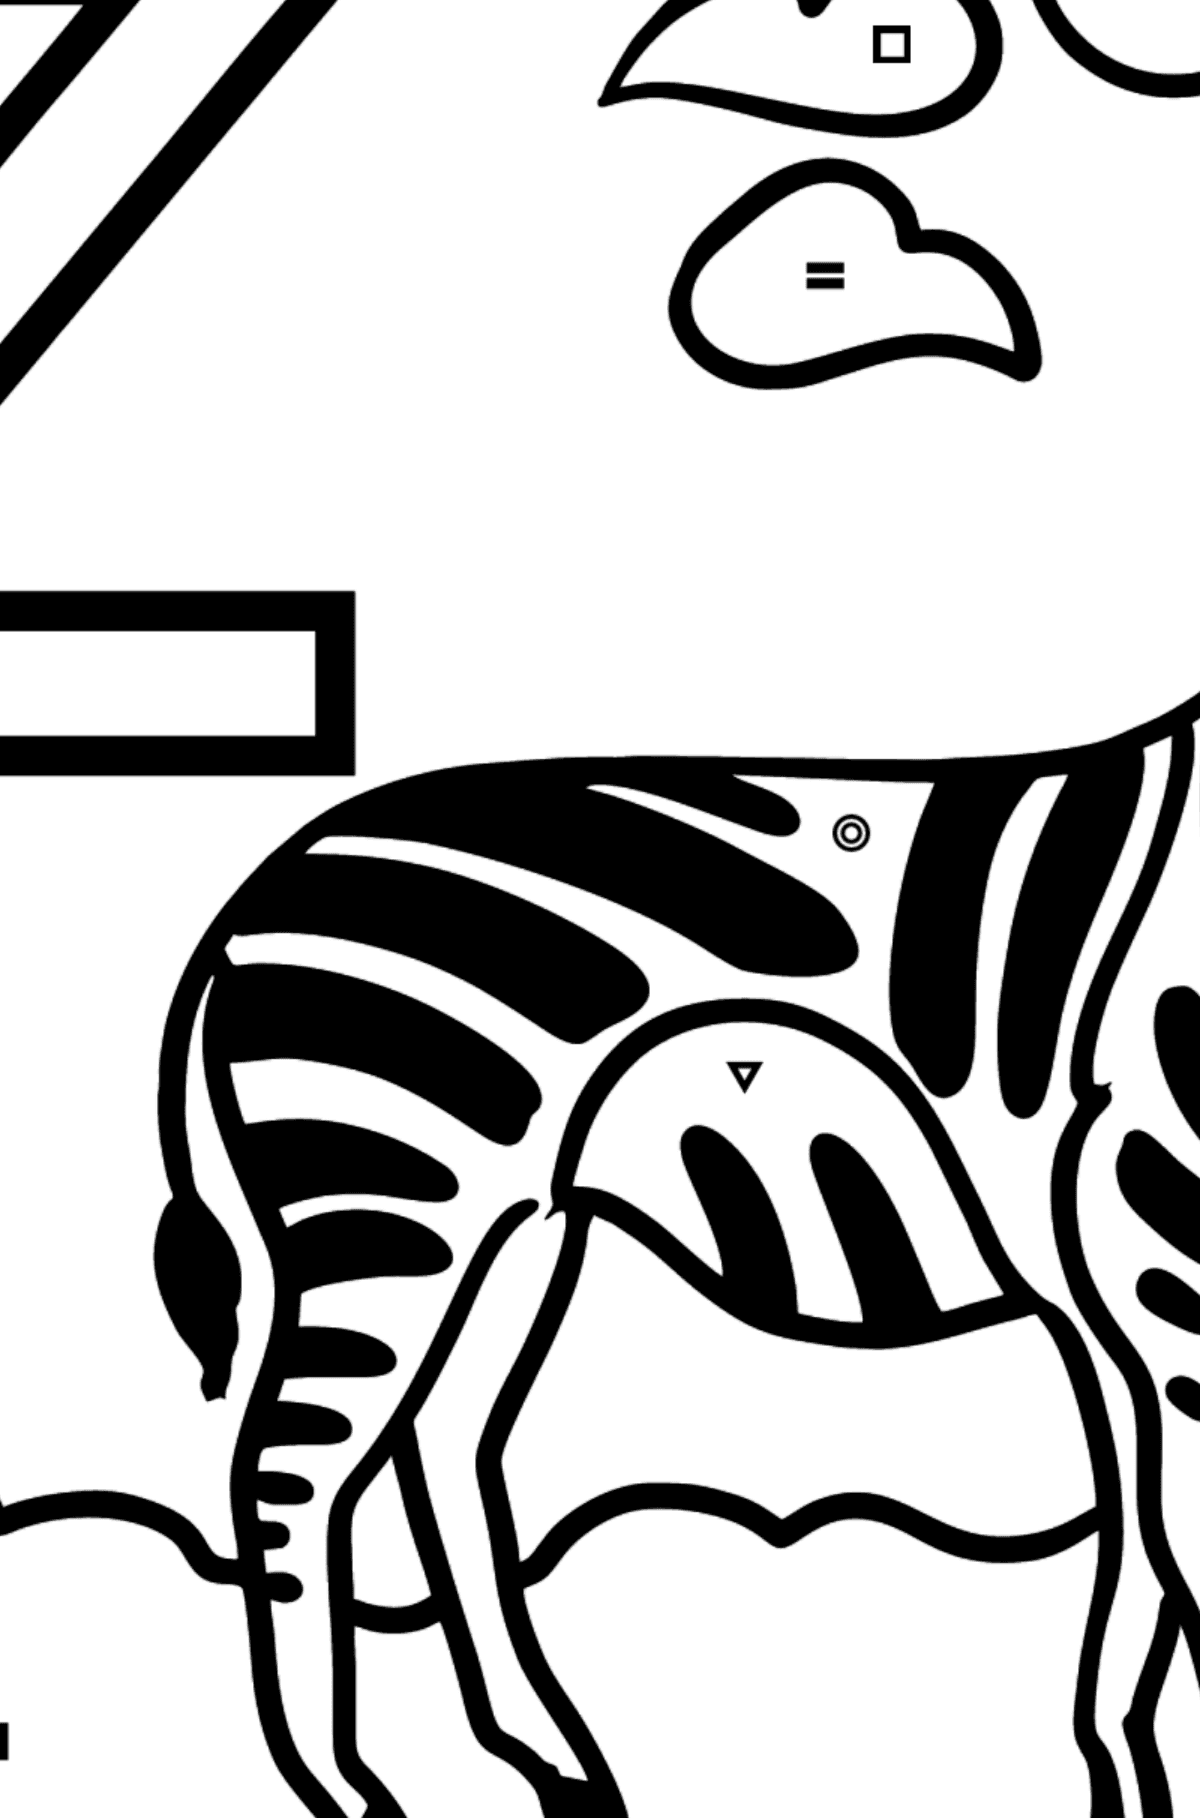 Portuguese Letter Z coloring pages - ZEBRA - Coloring by Symbols and Geometric Shapes for Kids